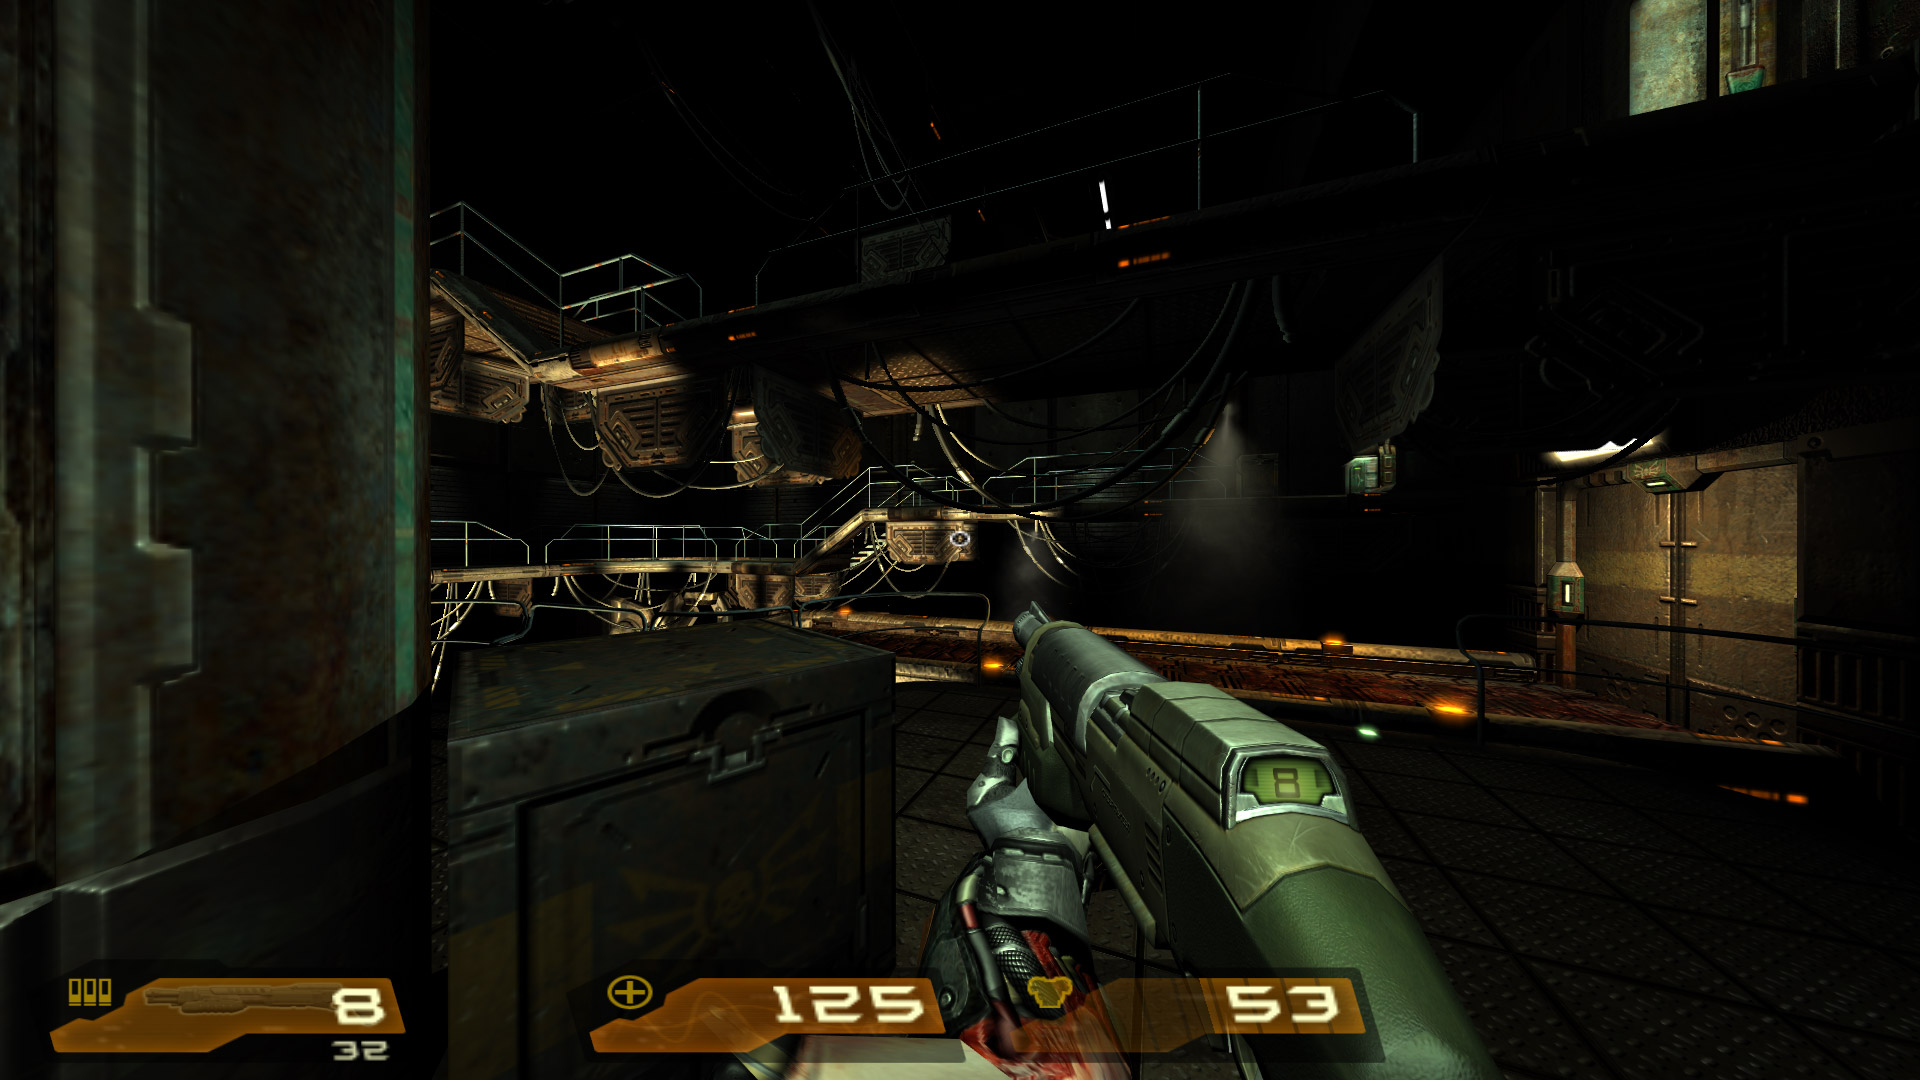 I have no idea where this is screenshot was taken. Quake 4 levels tend to all look Tthe same.